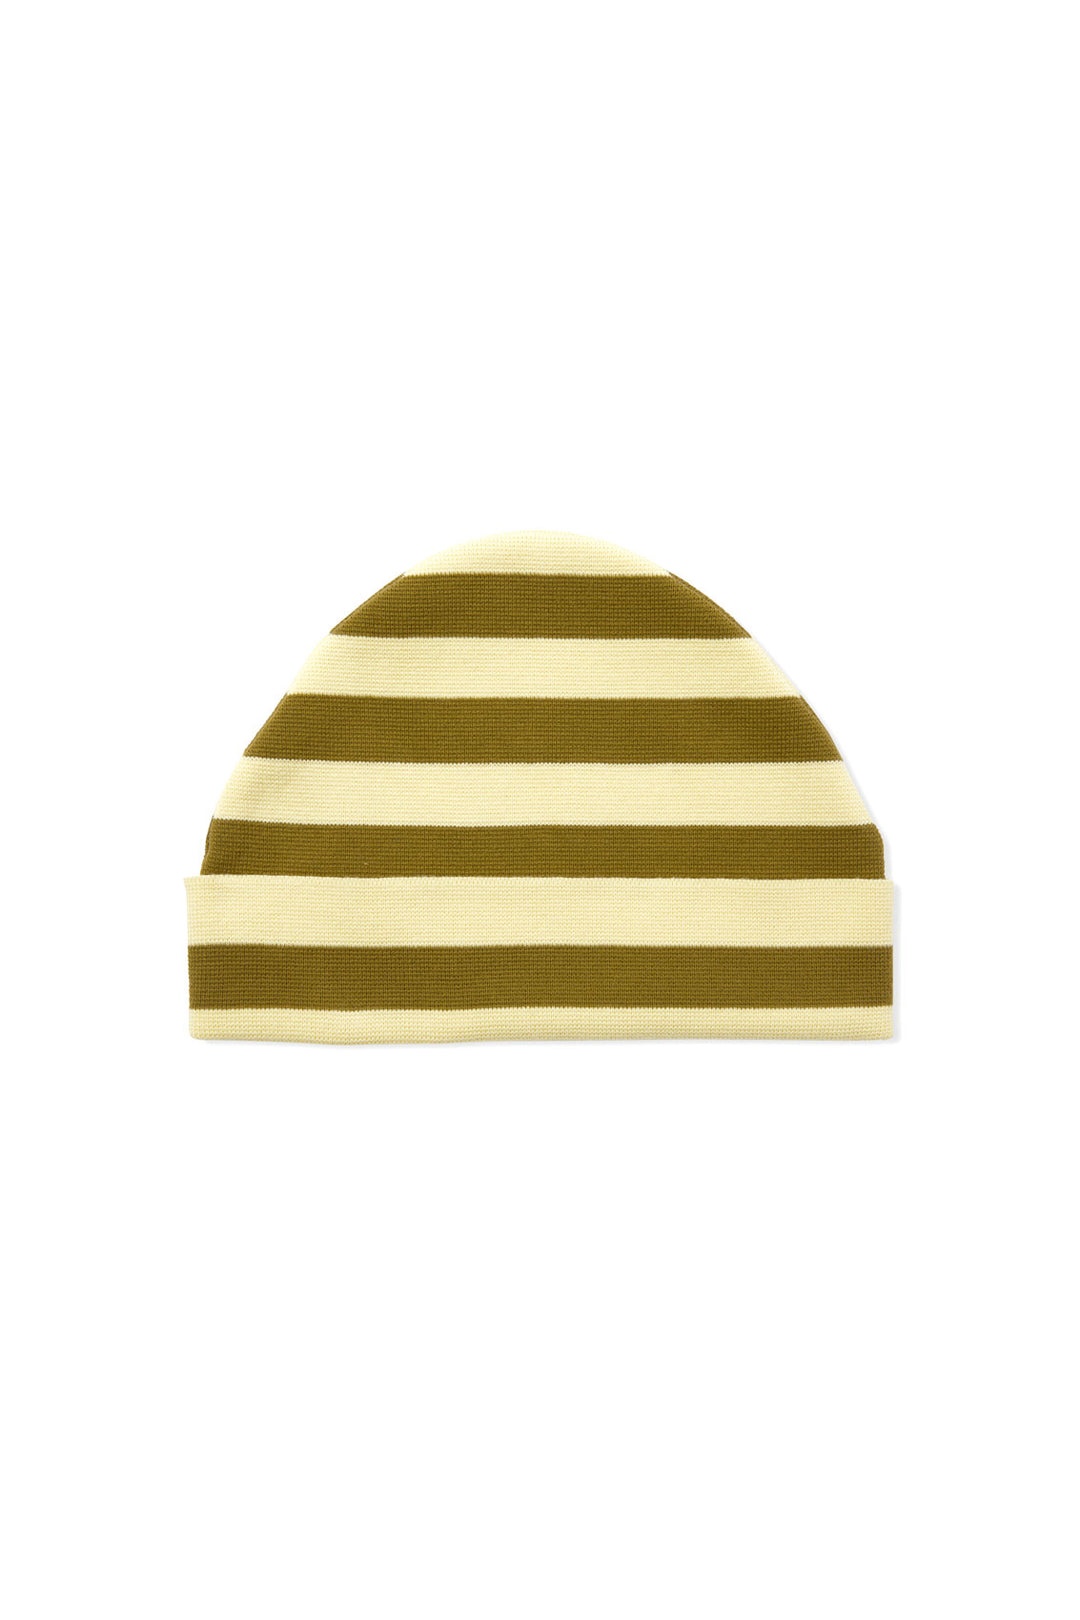 KNIT HAT / brown & yellow - 1